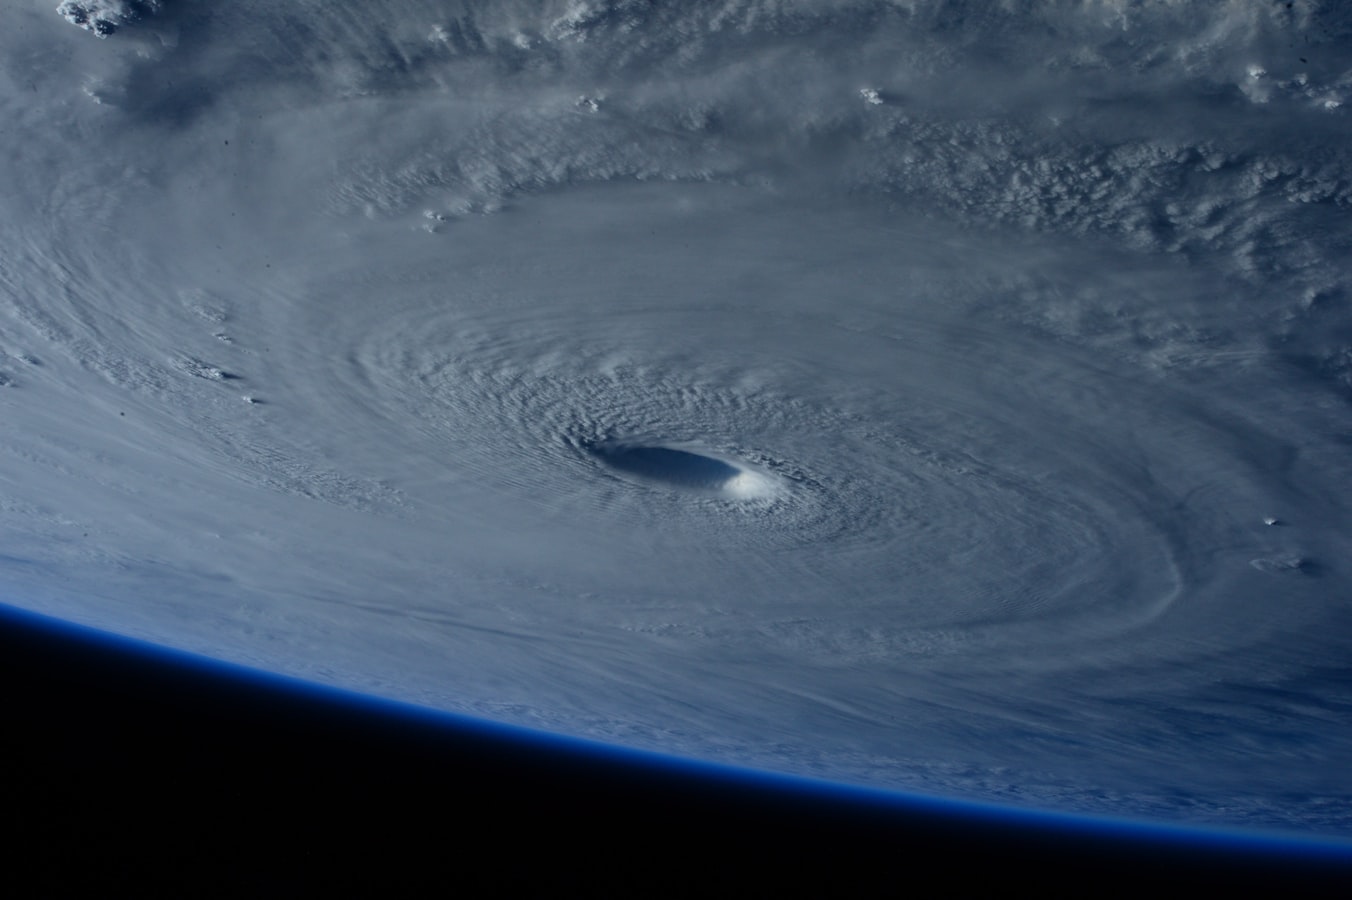 Nuking hurricanes out of the sky ‘doesn’t make sense at all’